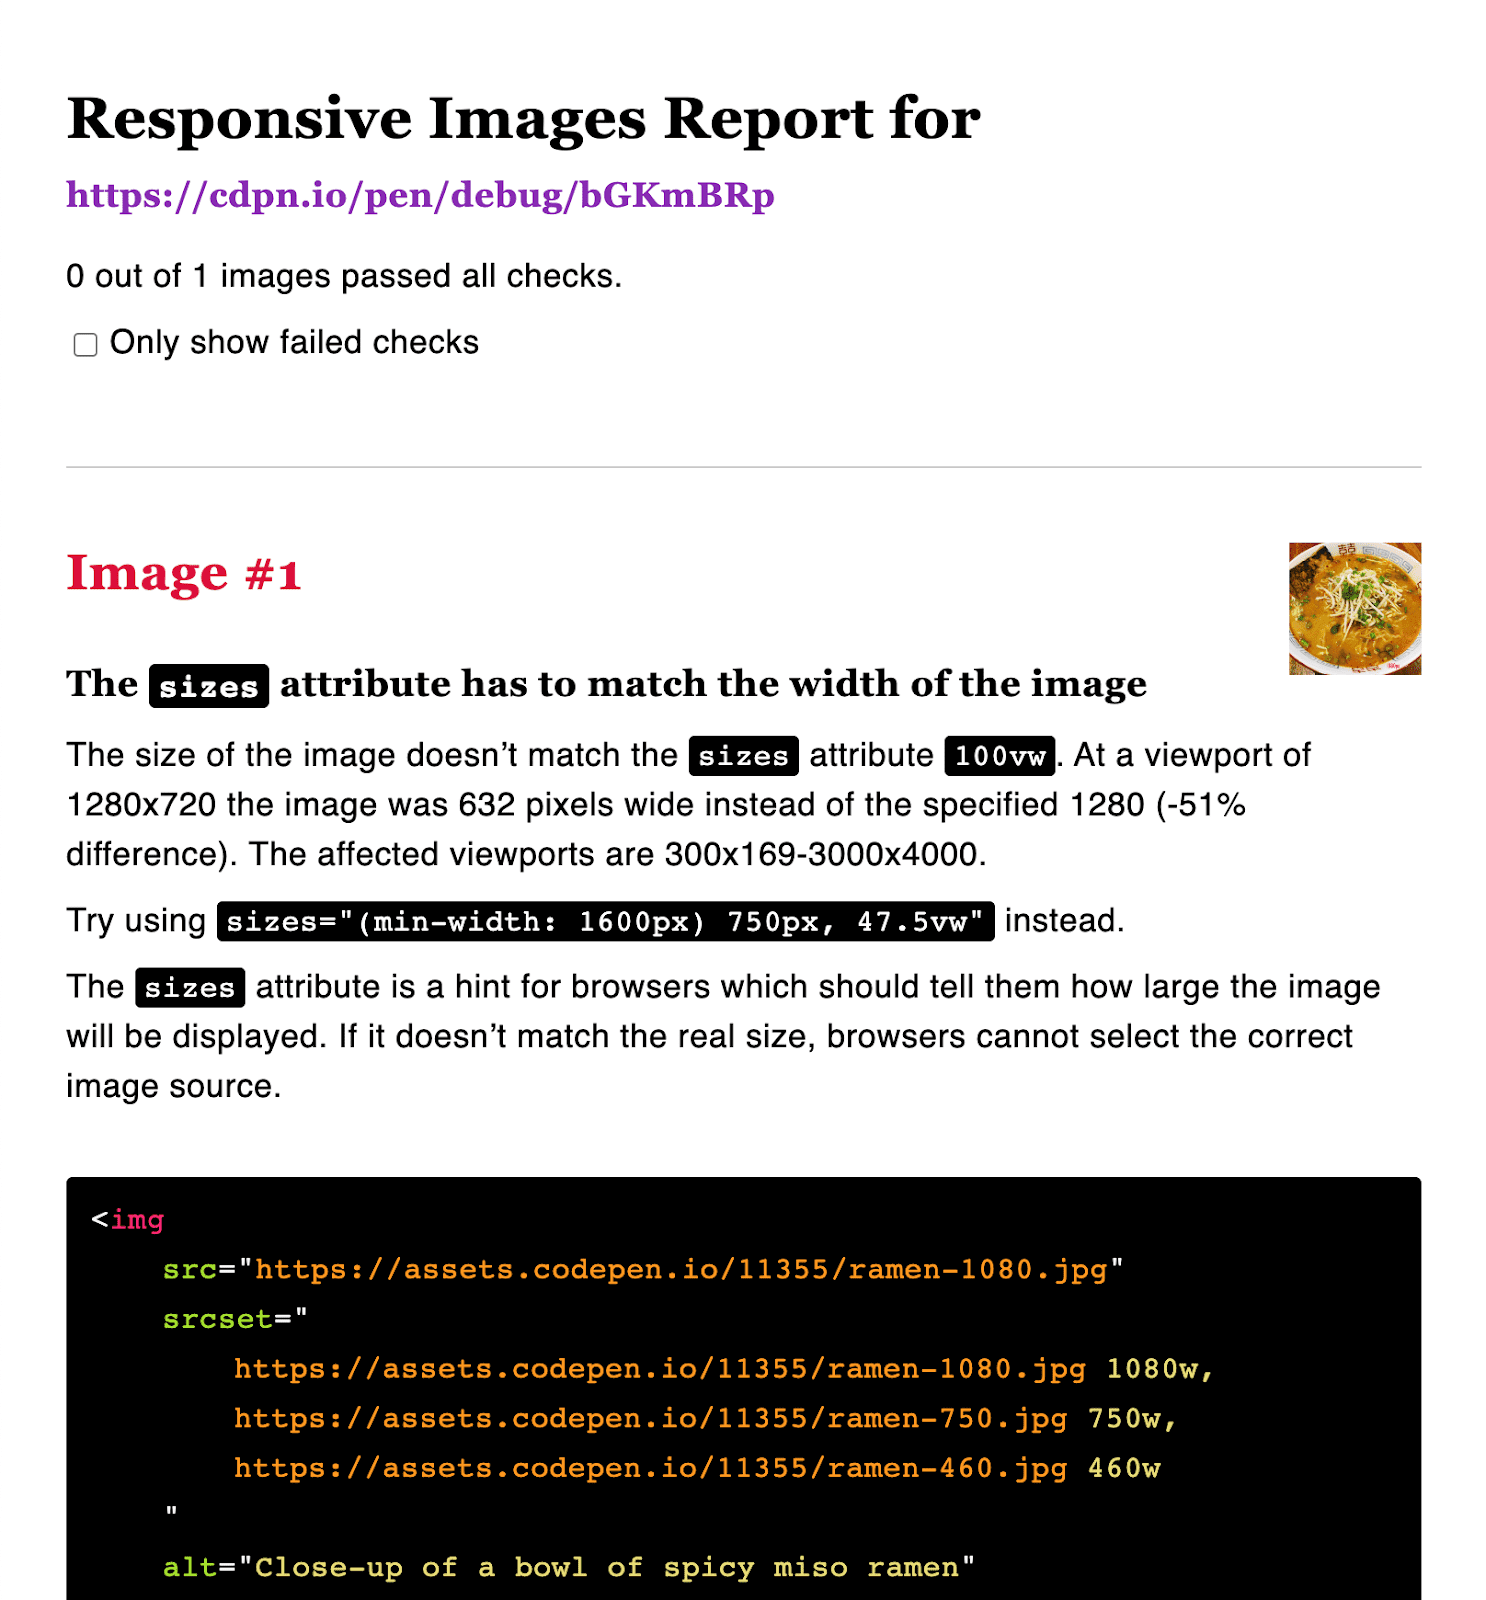 Responsive image report showing size/width mismatch.